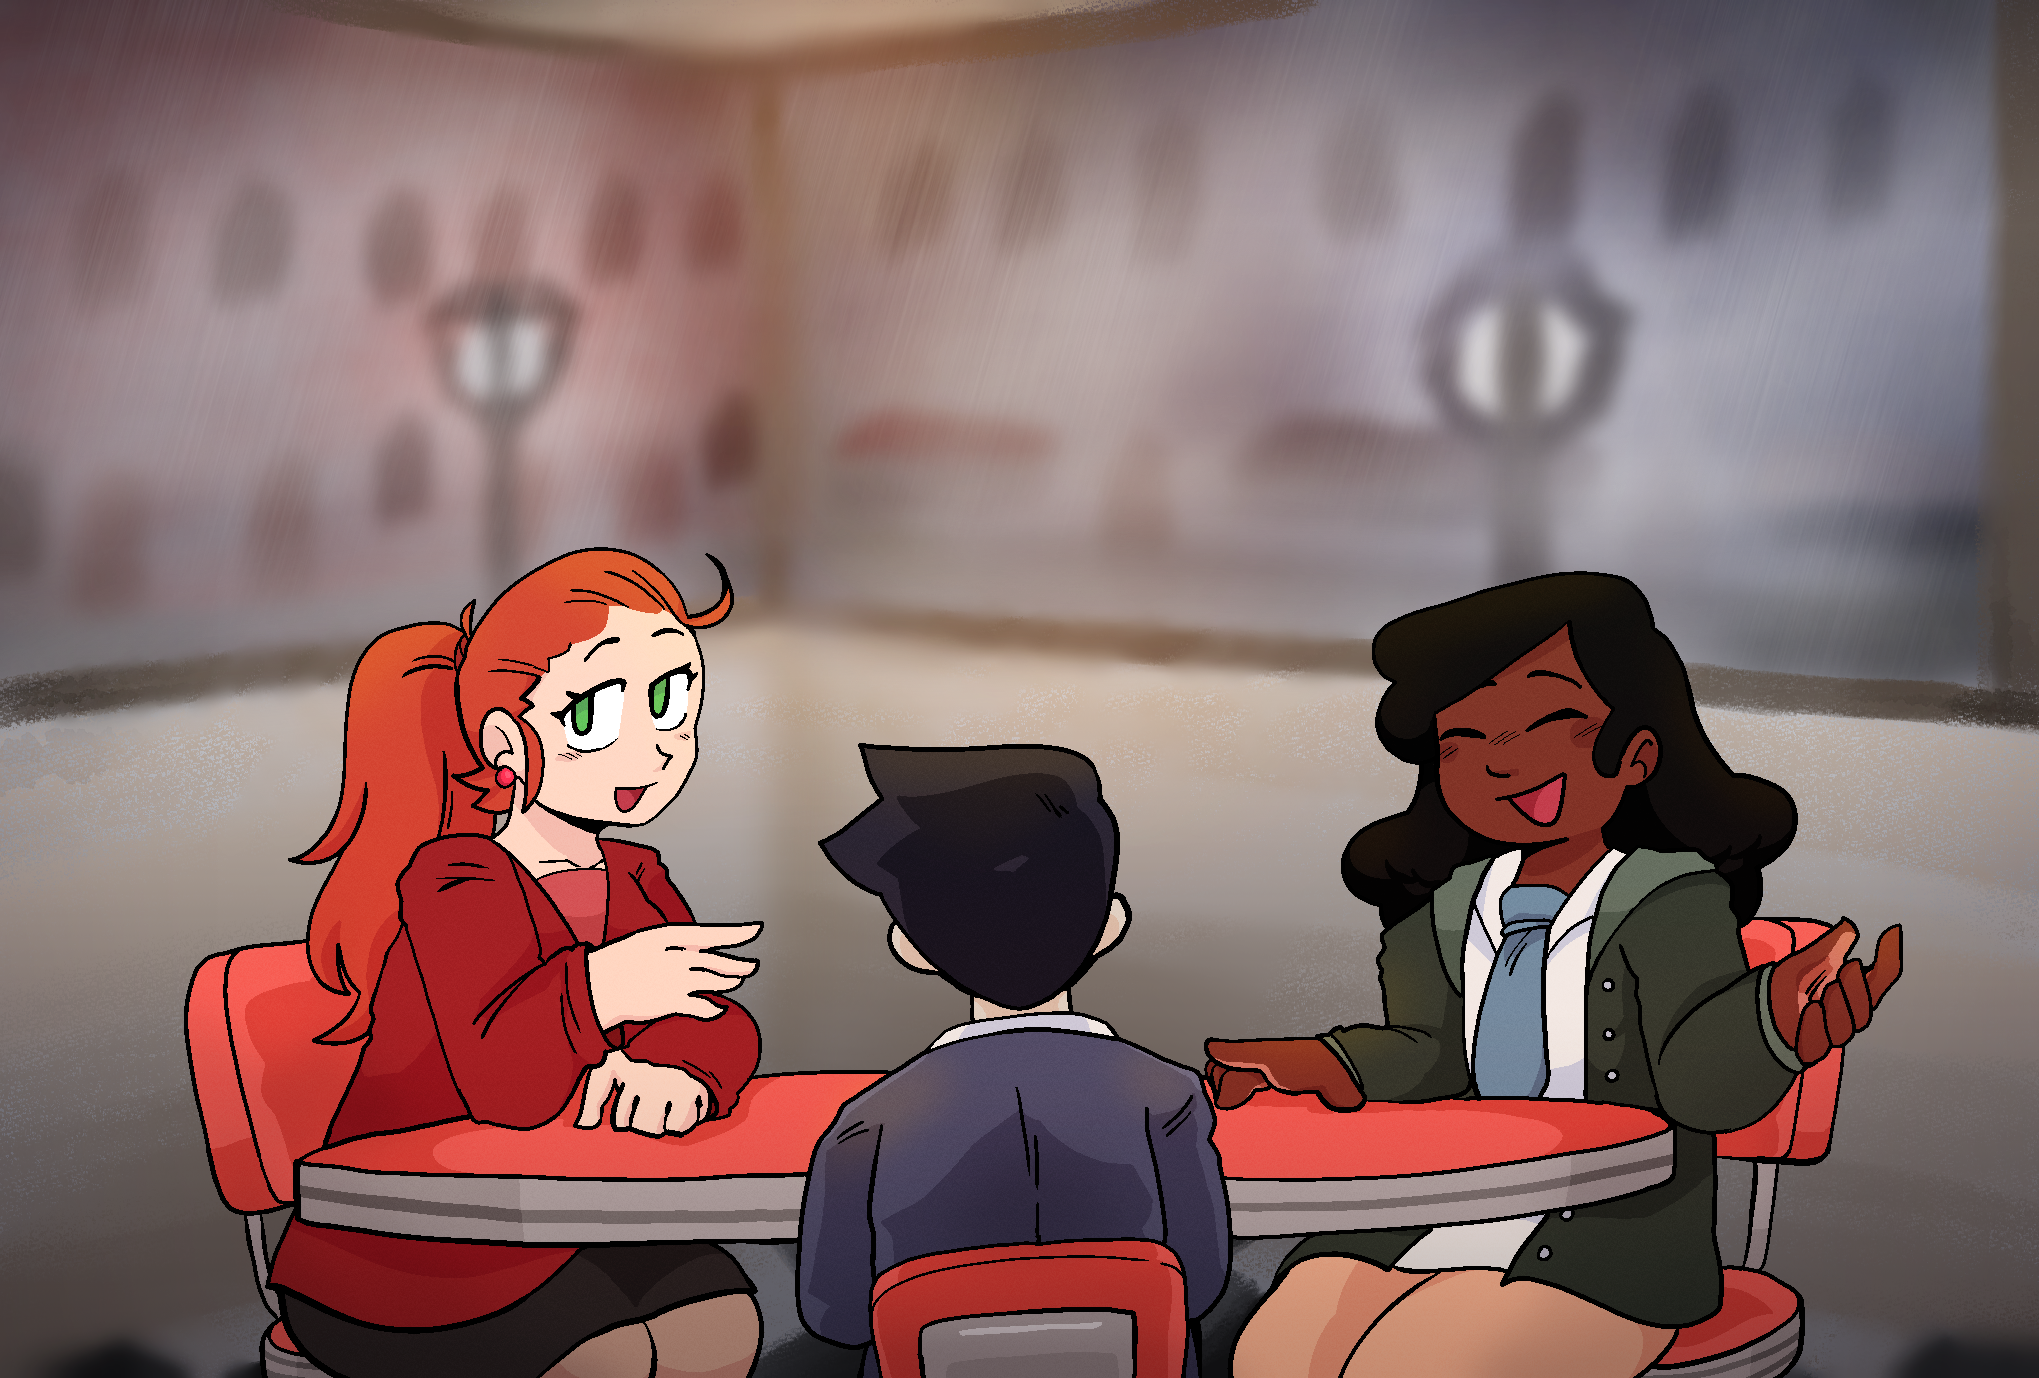 Artwork drawn to commemorate Commonplace's one-year anniversary of release. It depicts the in-game scene of Sam, Rachel, and Tracy visiting the diner.